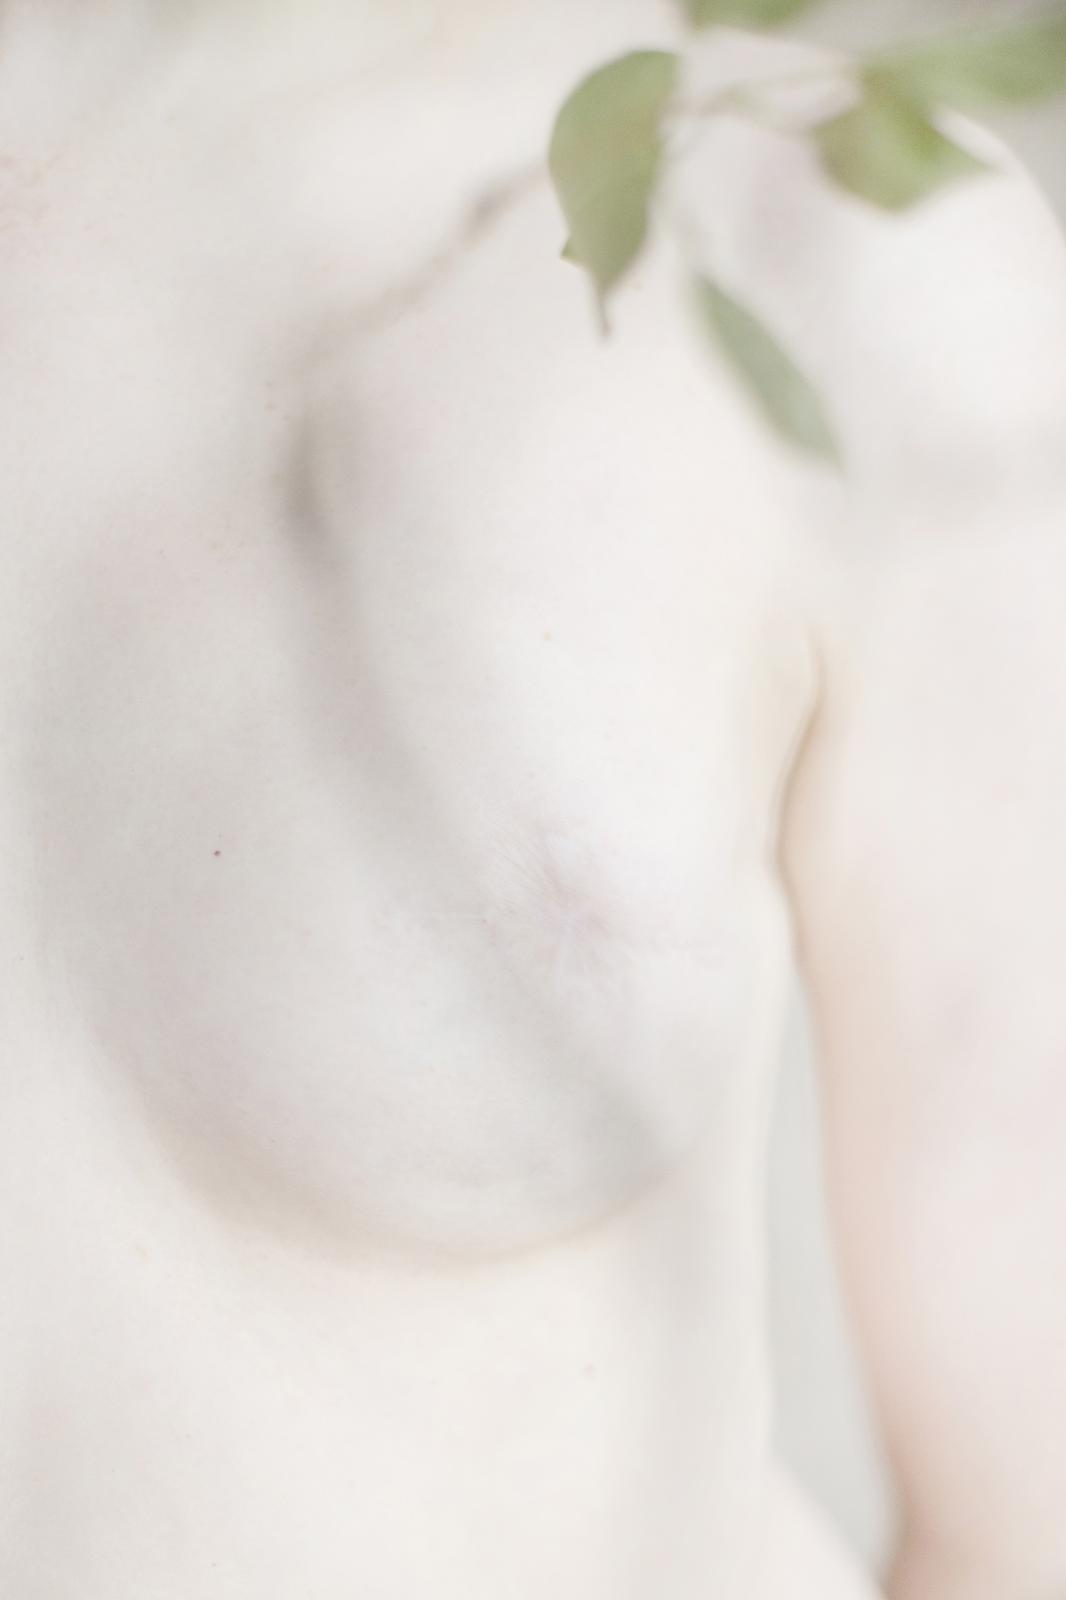 Am I Not Scared Anymore? - For most women with this diagnosis nude photography is...